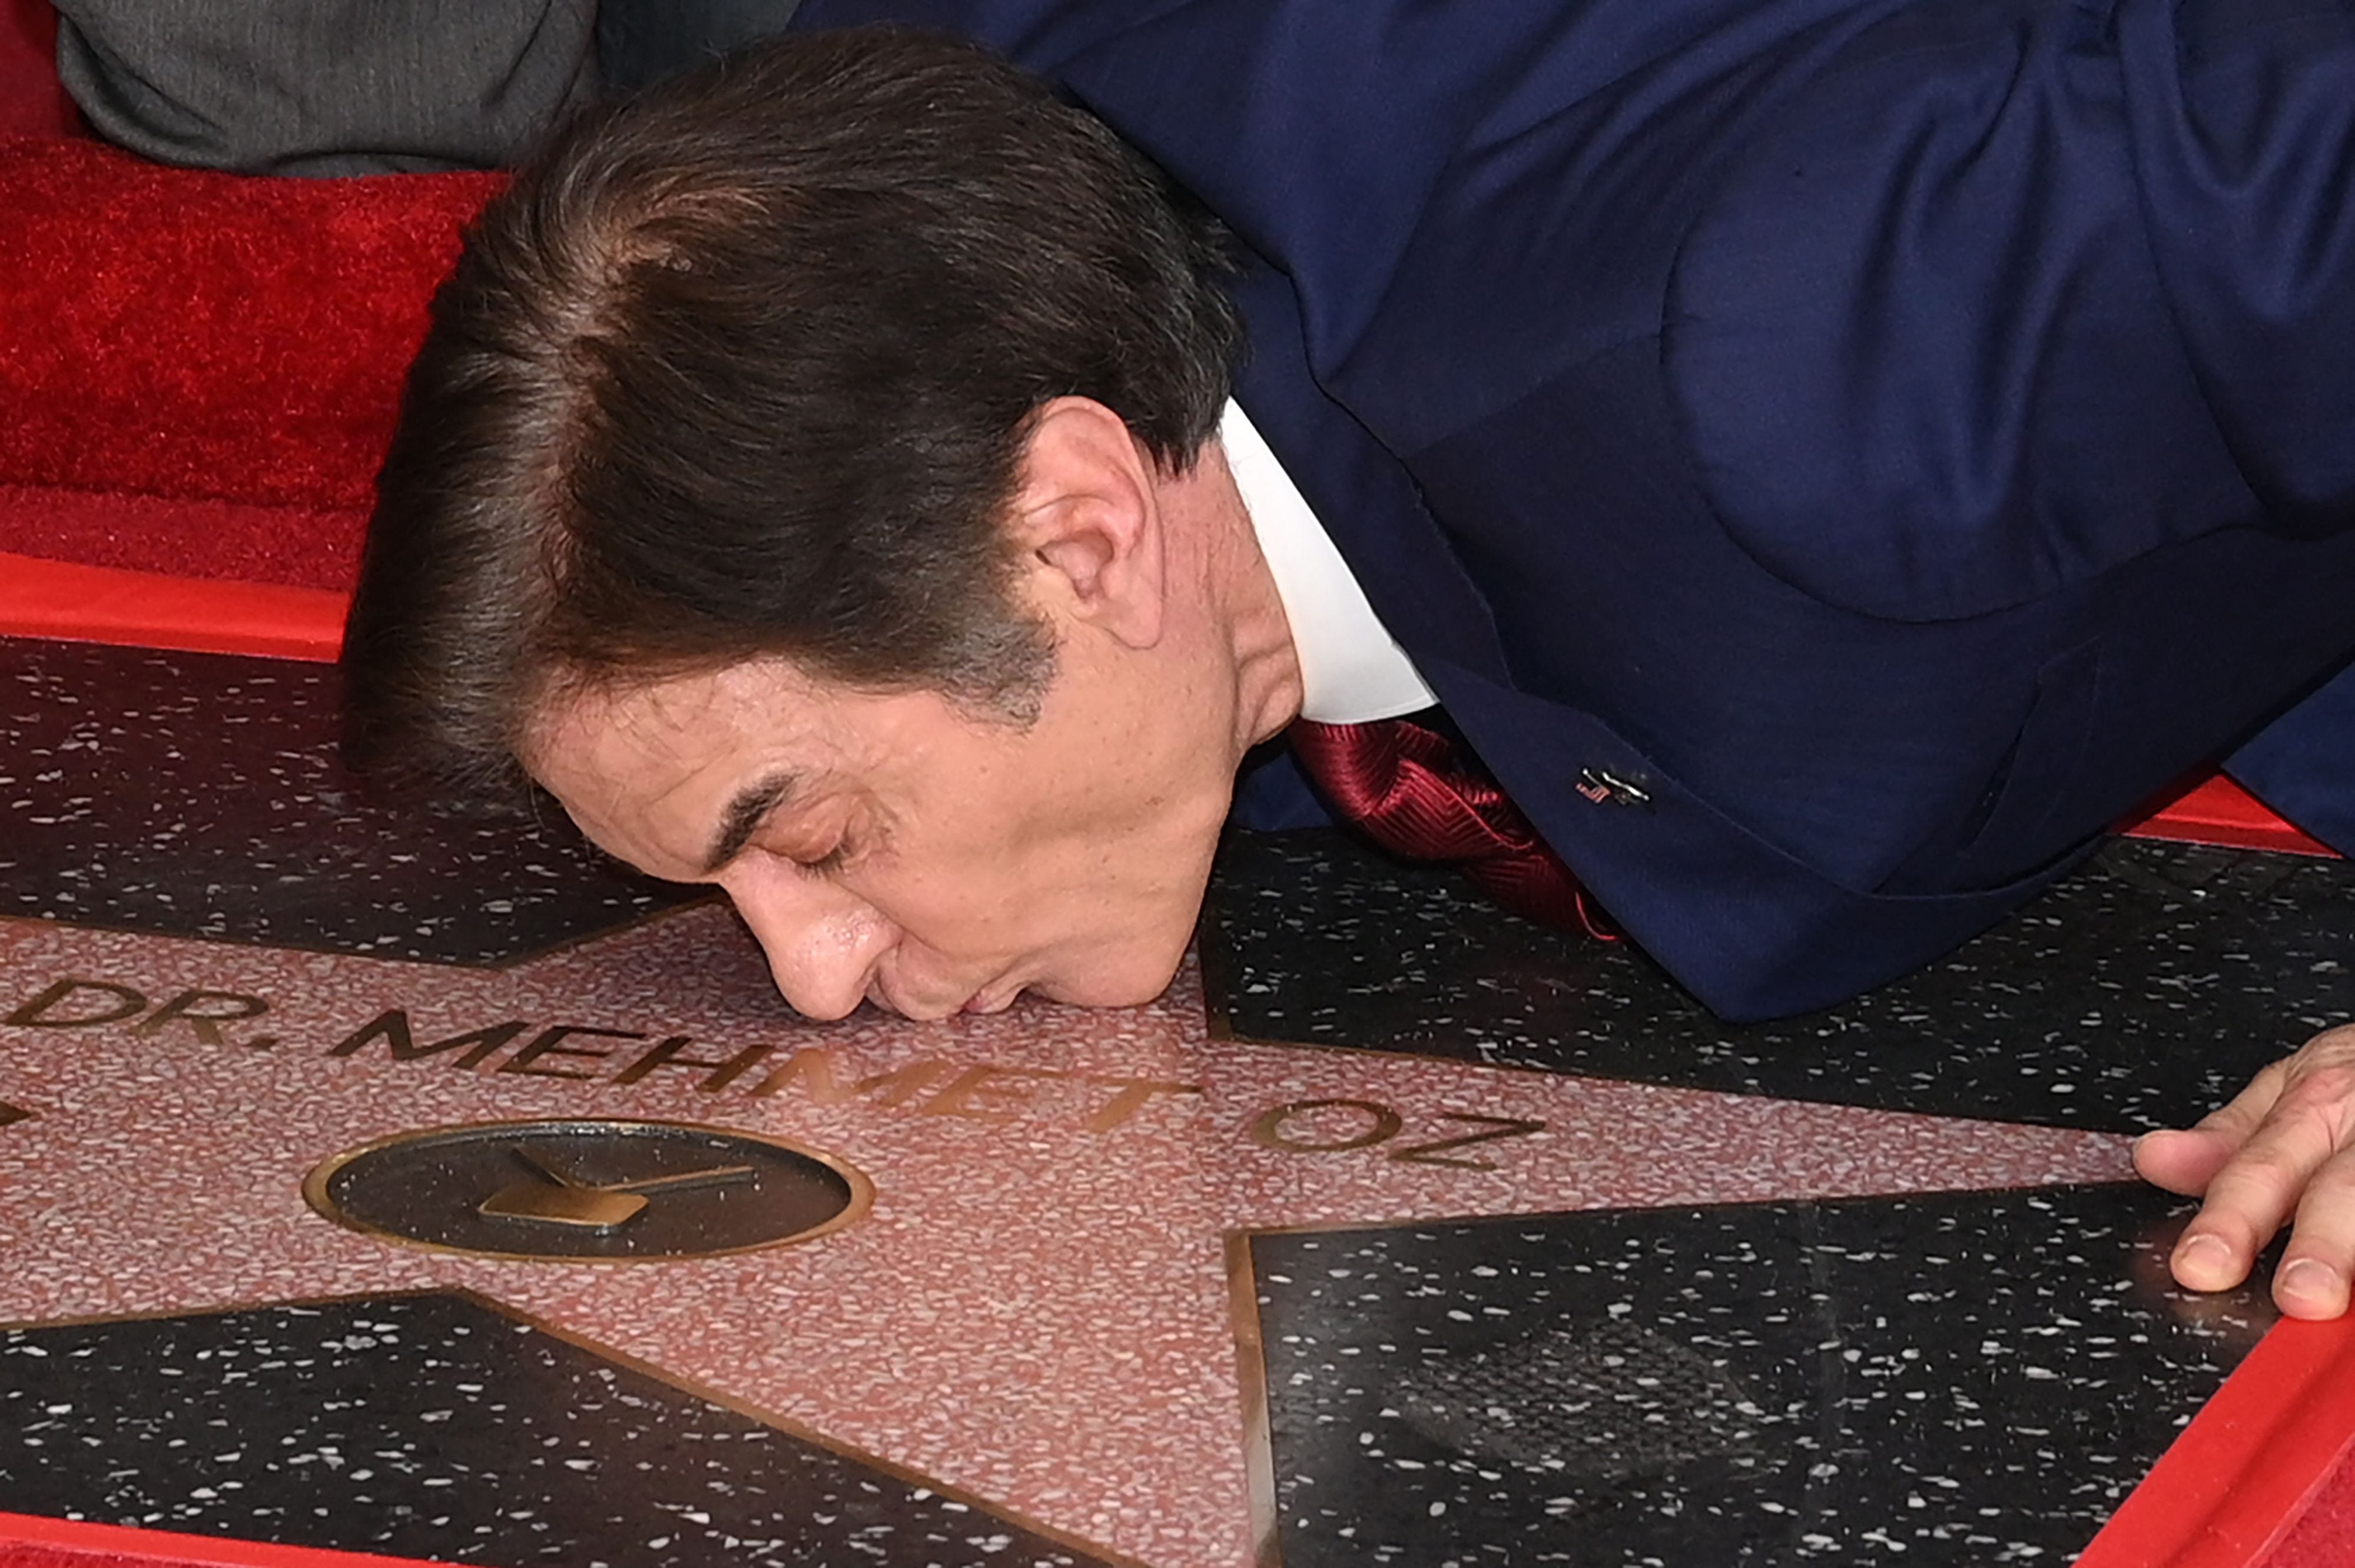 Stars on stars on stars! Since 1960, the Hollywood Chamber of Commerce has been honoring famous faces in music, film, TV and more by putting their names on terrazzo and brass stars down Hollywood Boulevard. There are now more than 2,600 stars on the Walk of Fame, a popular tourist destination in Hollywood, California.<br> <br> Scroll through to see some of your favorite celebrities get their stars, starting with television host Dr. Mehmet Oz, whose star was unveiled on Feb. 11, 2022.